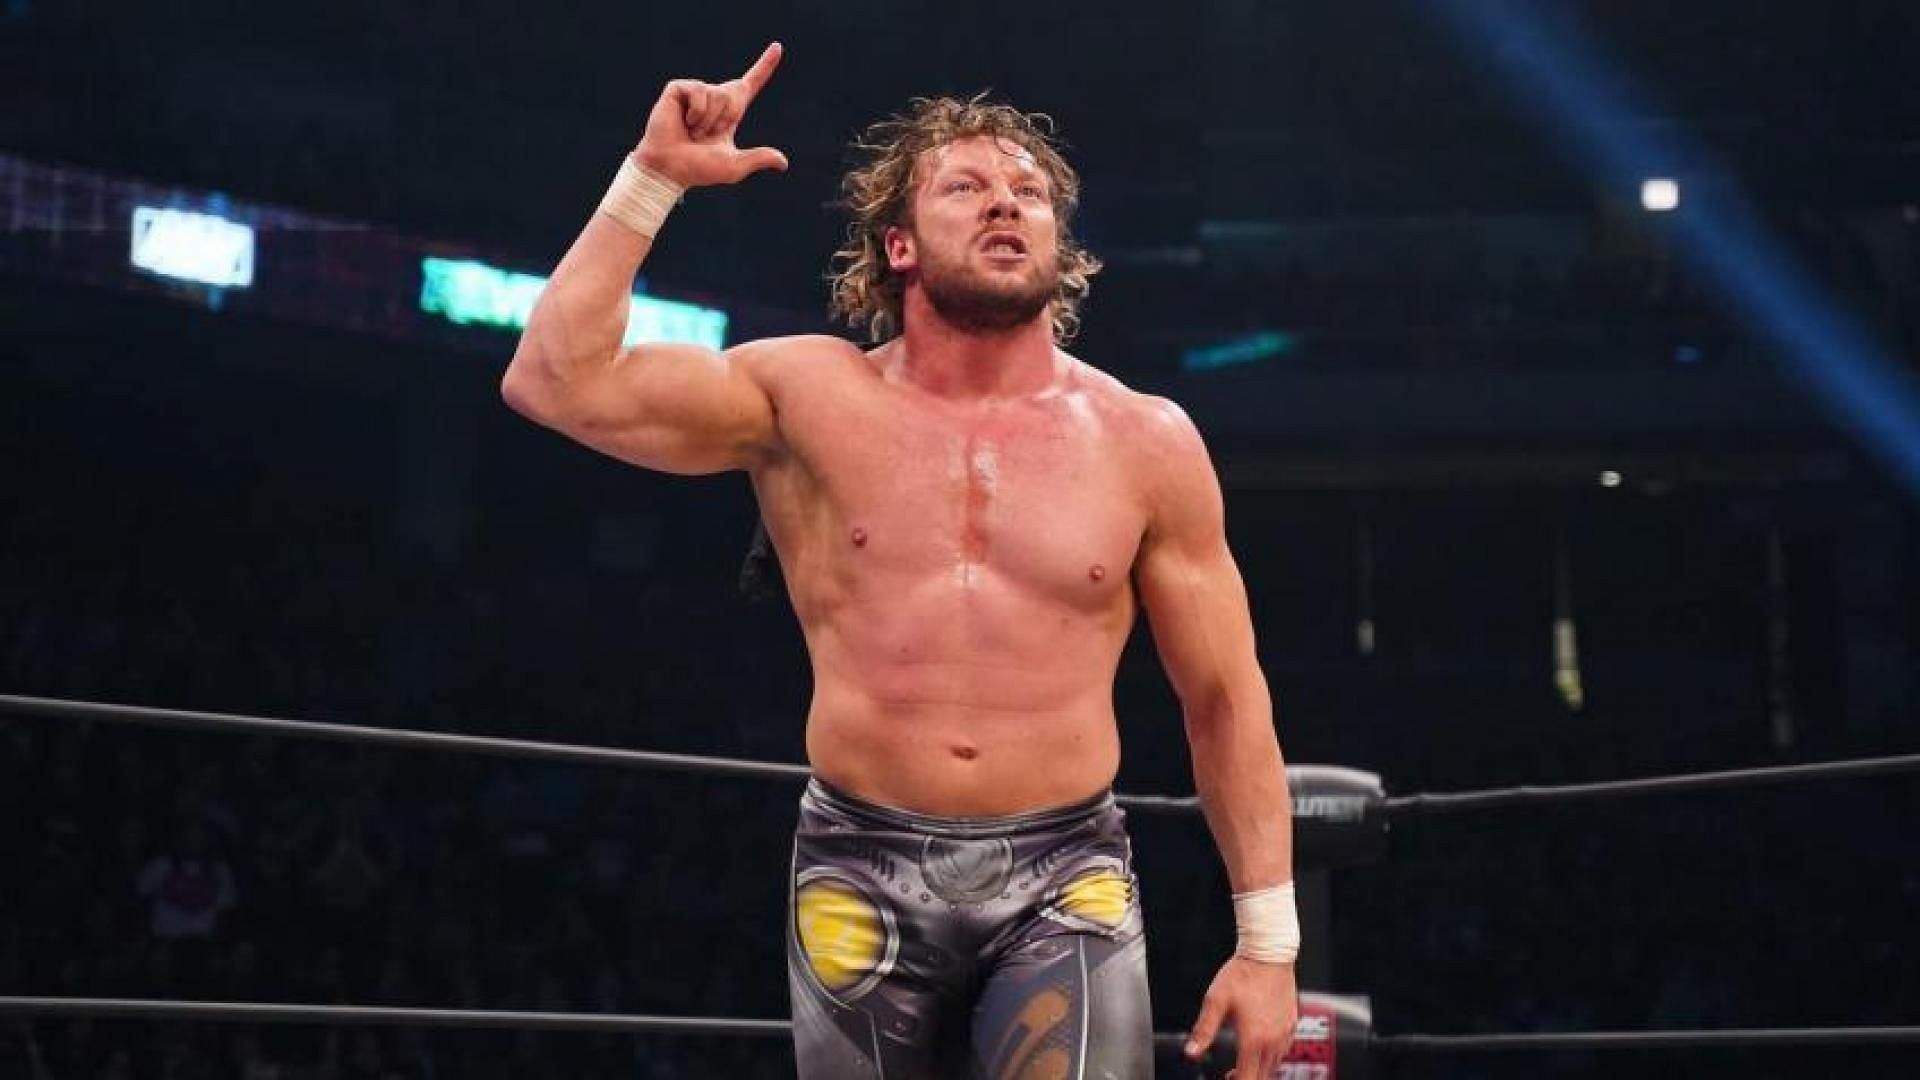 It remains to be seen if Kenny Omega will be a part of AEW x NJPW Forbidden Door